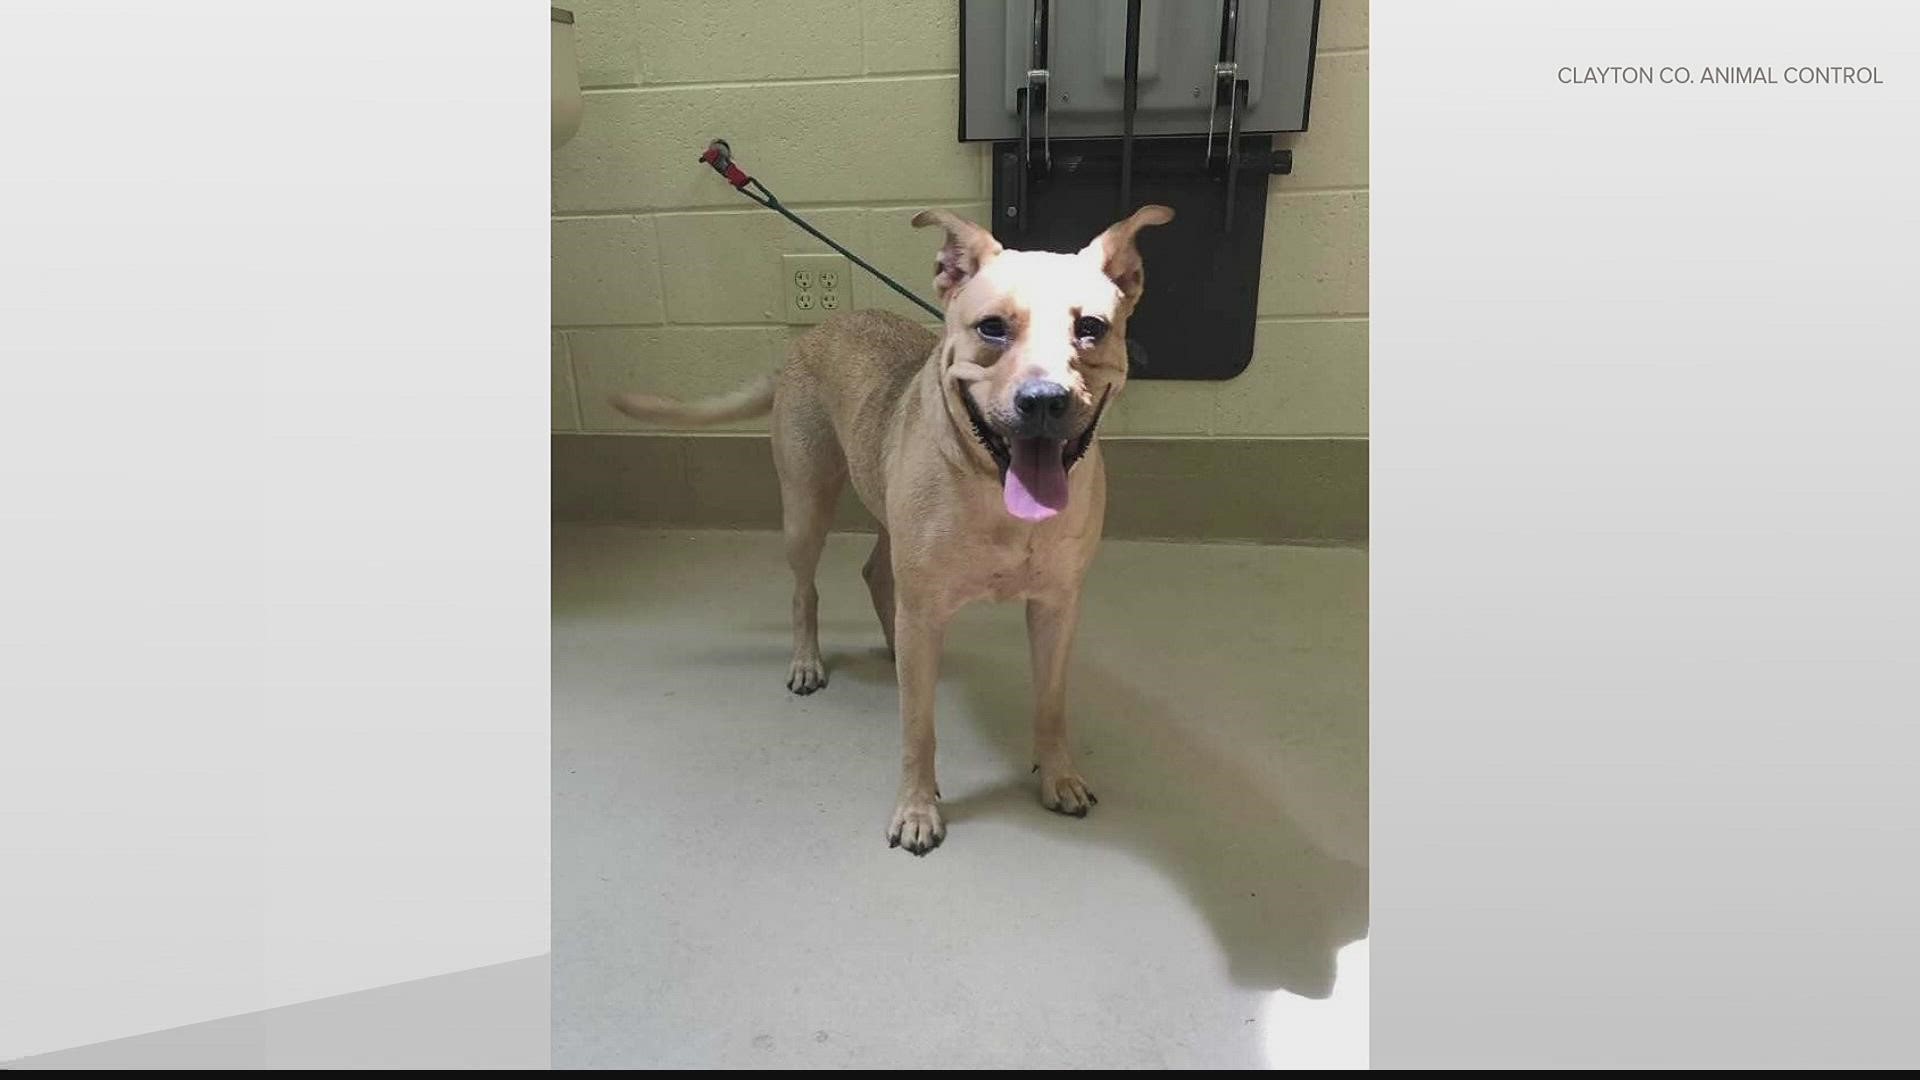 At least 20 dogs at the Clayton County animal shelter are at risk of being euthanized this week if not adopted.